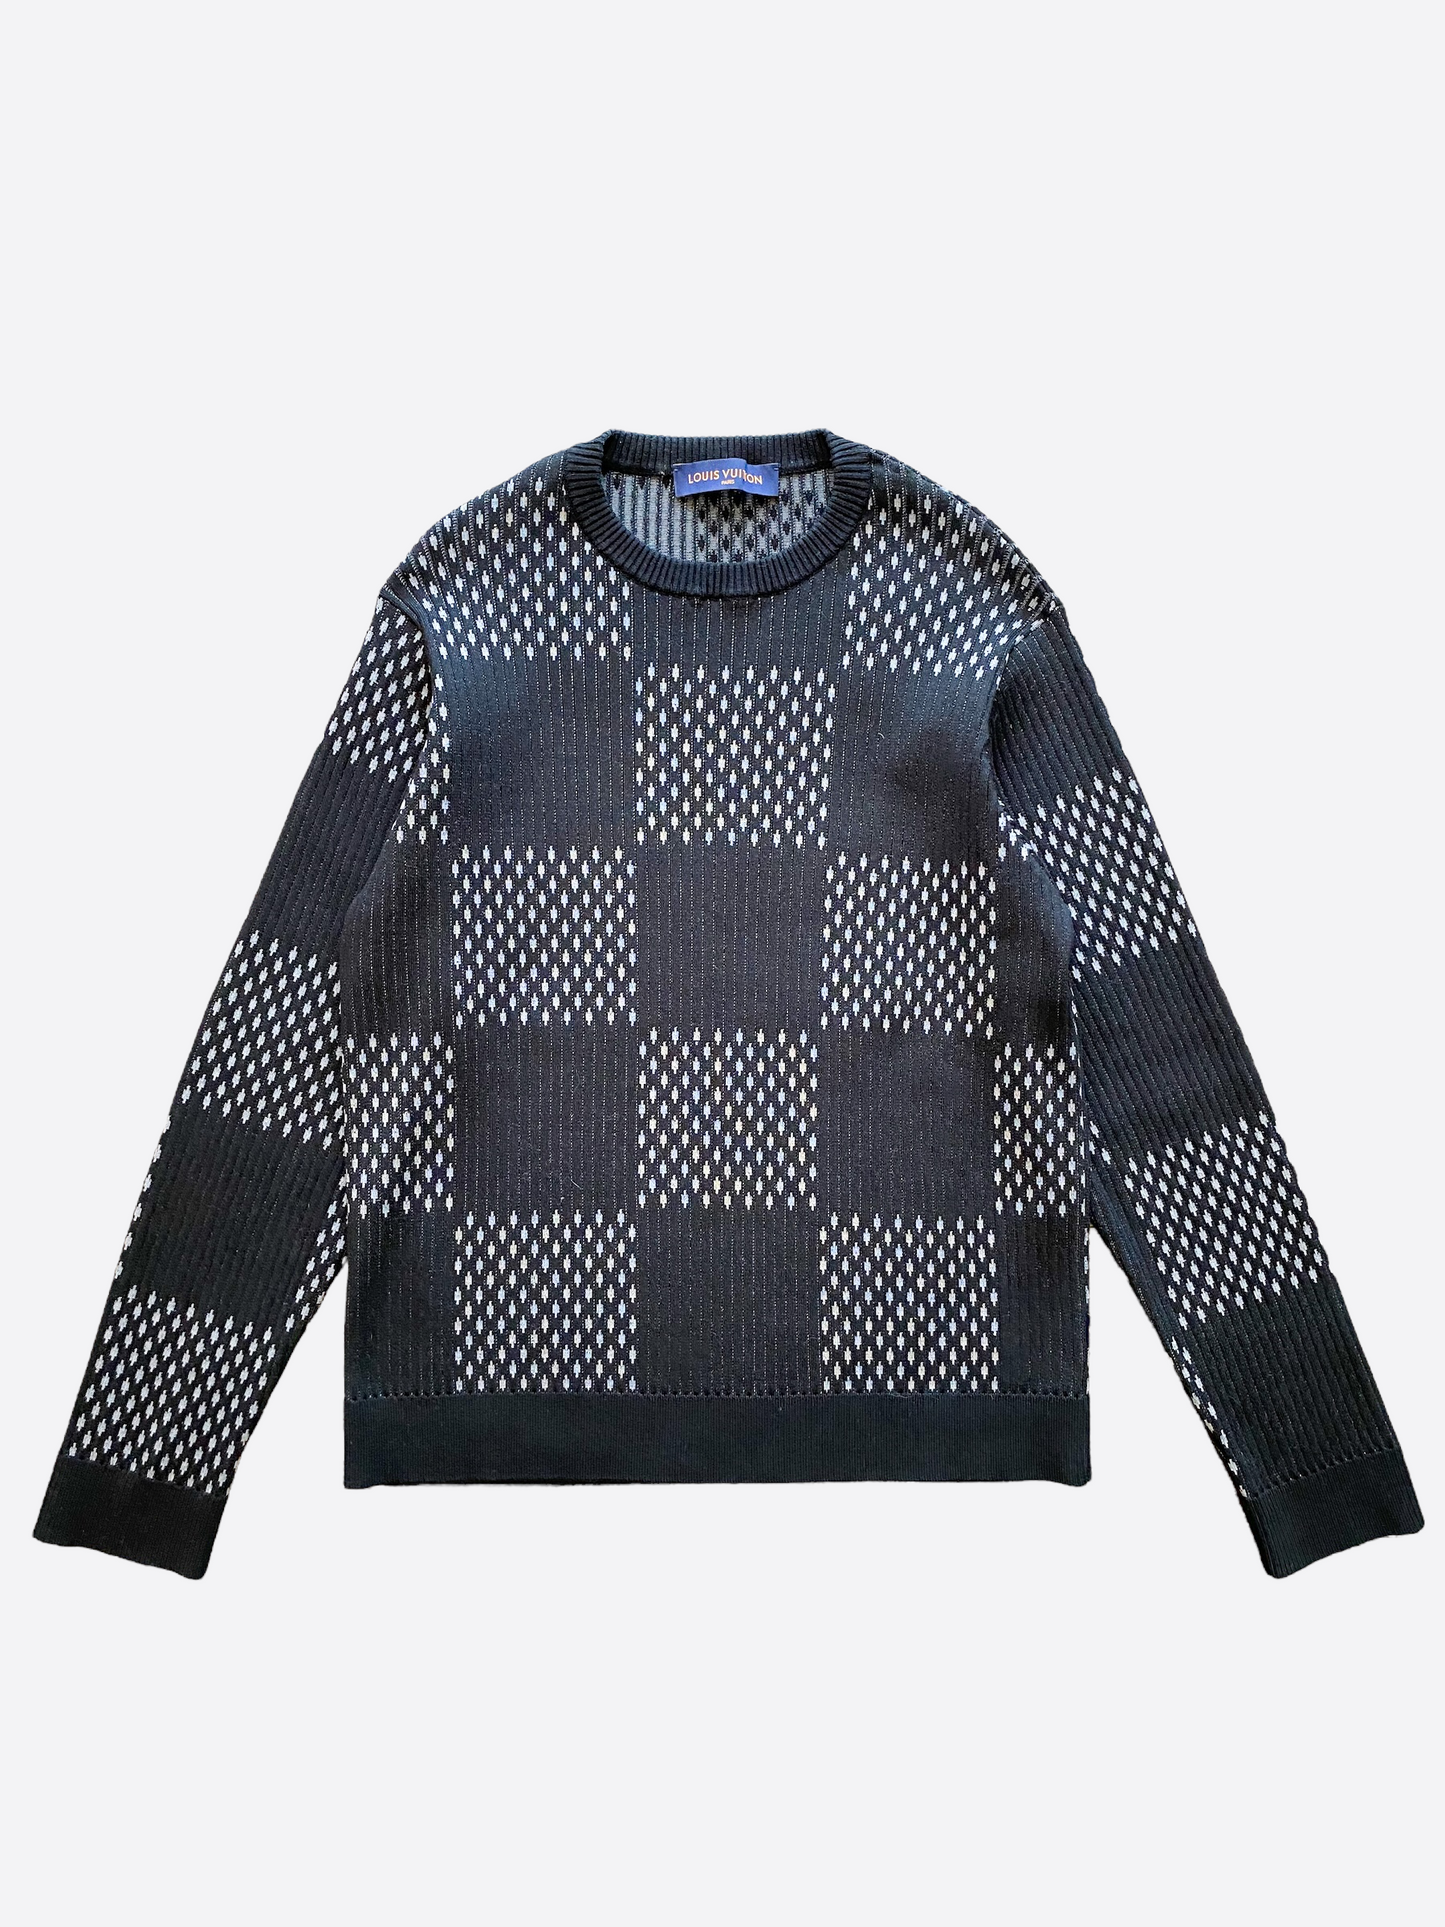 Louis Vuitton, Sweaters, Authentic Louis Vuitton Mens Damier Wool Sweater  Barely Worn Like New